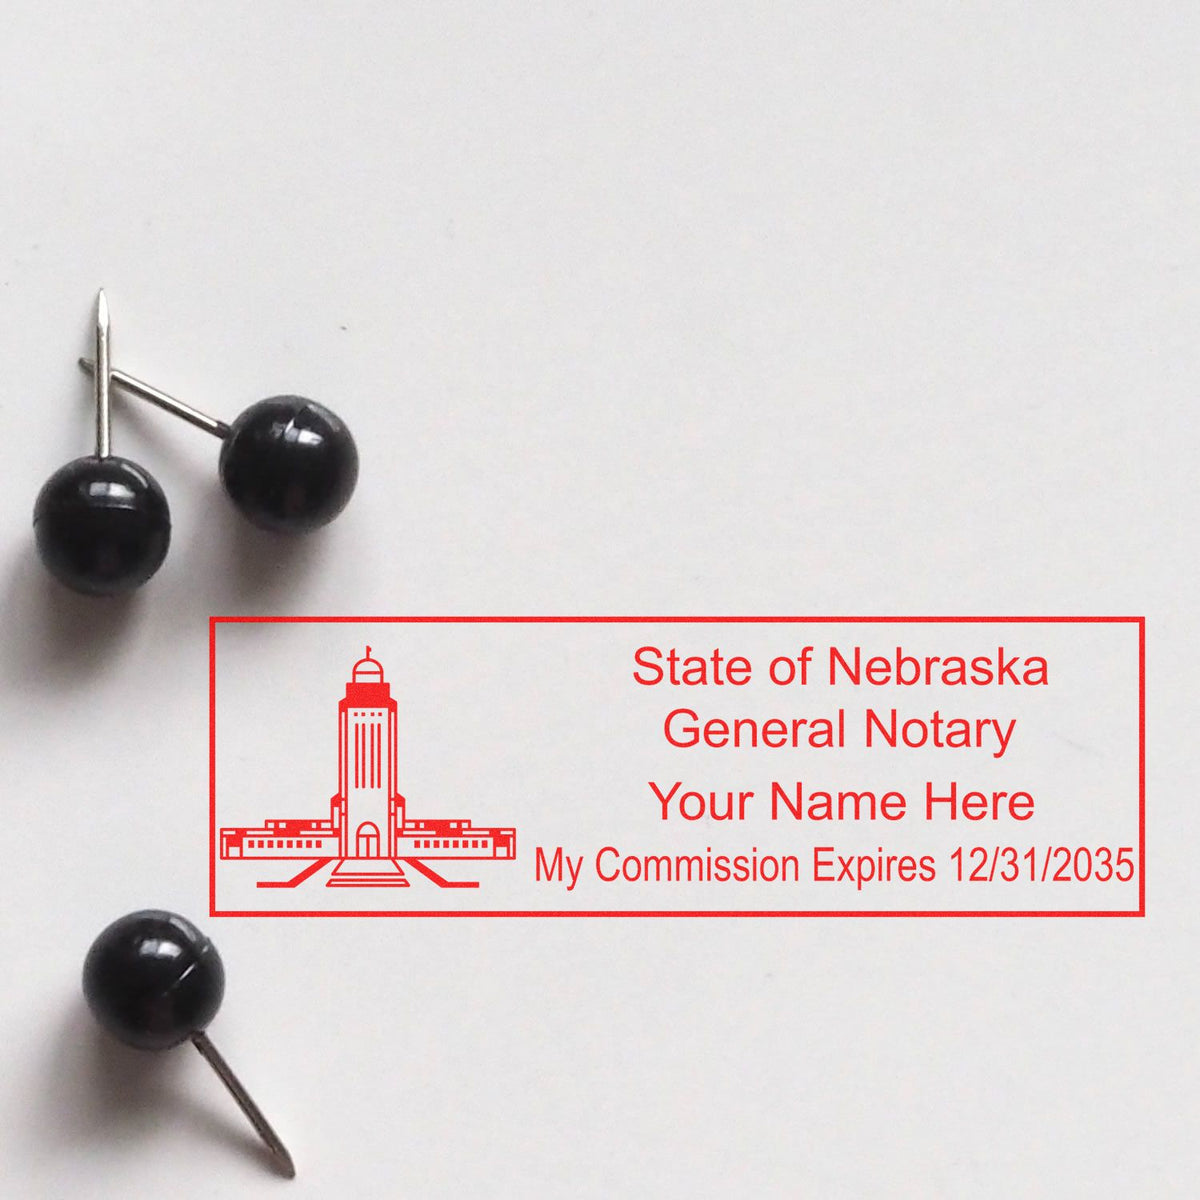 The Heavy-Duty Nebraska Rectangular Notary Stamp stamp impression comes to life with a crisp, detailed photo on paper - showcasing true professional quality.